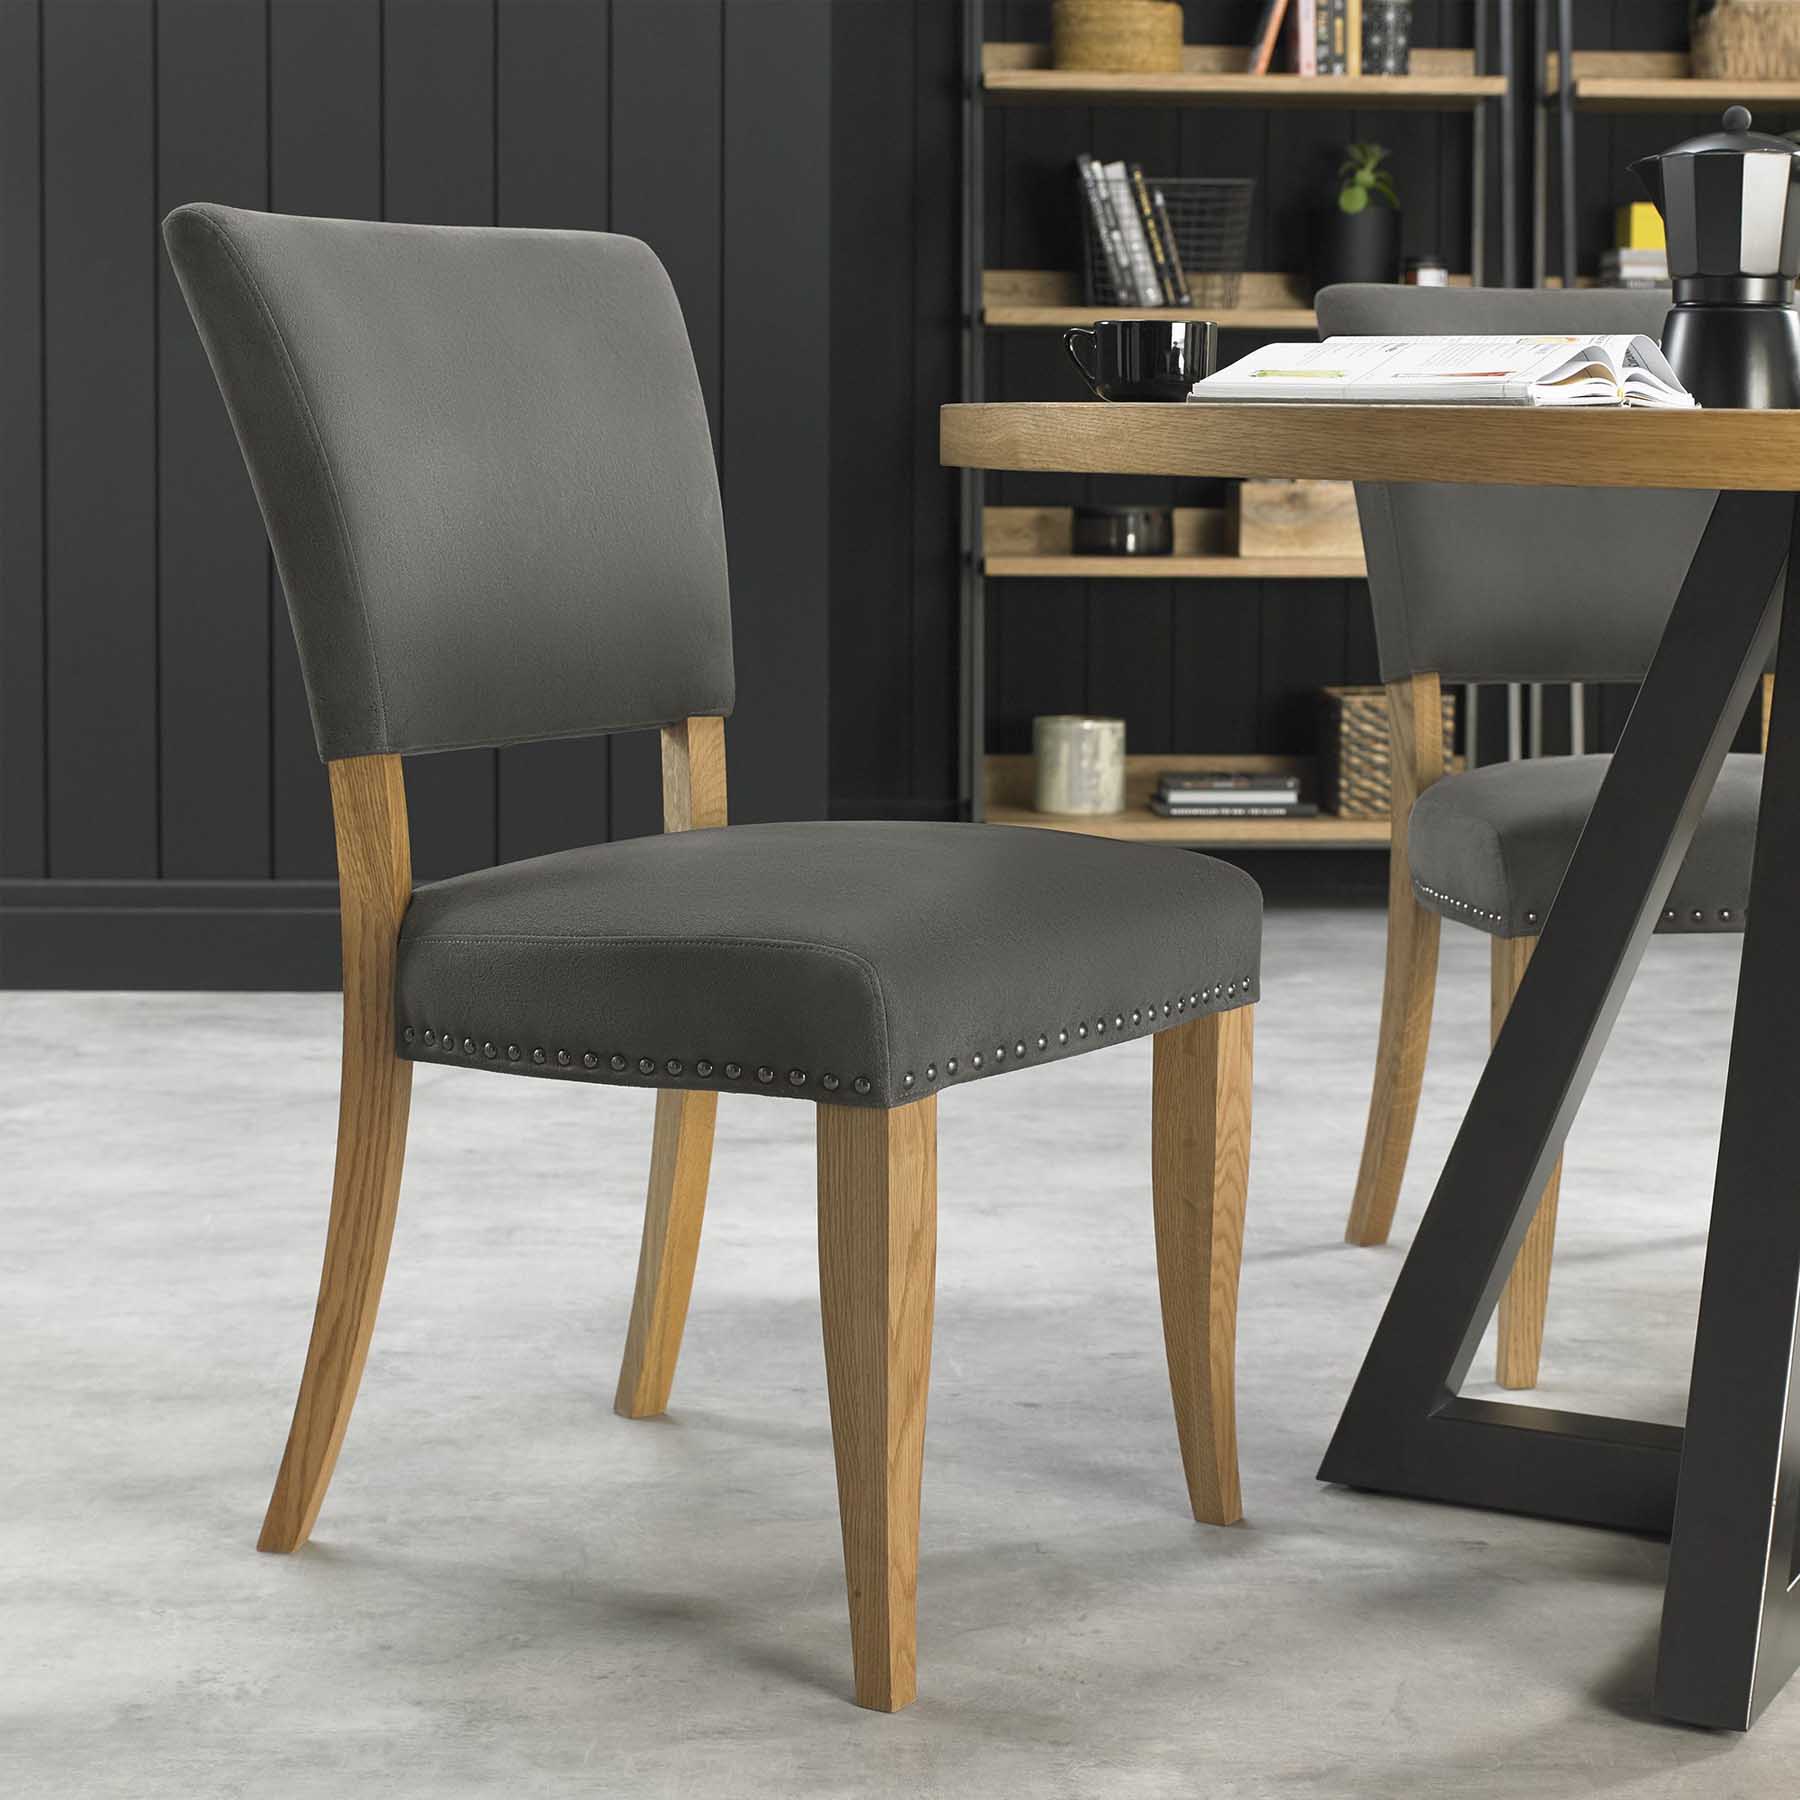 Ravi Rustic Oak Upholstered Dining, Rustic Padded Dining Chairs